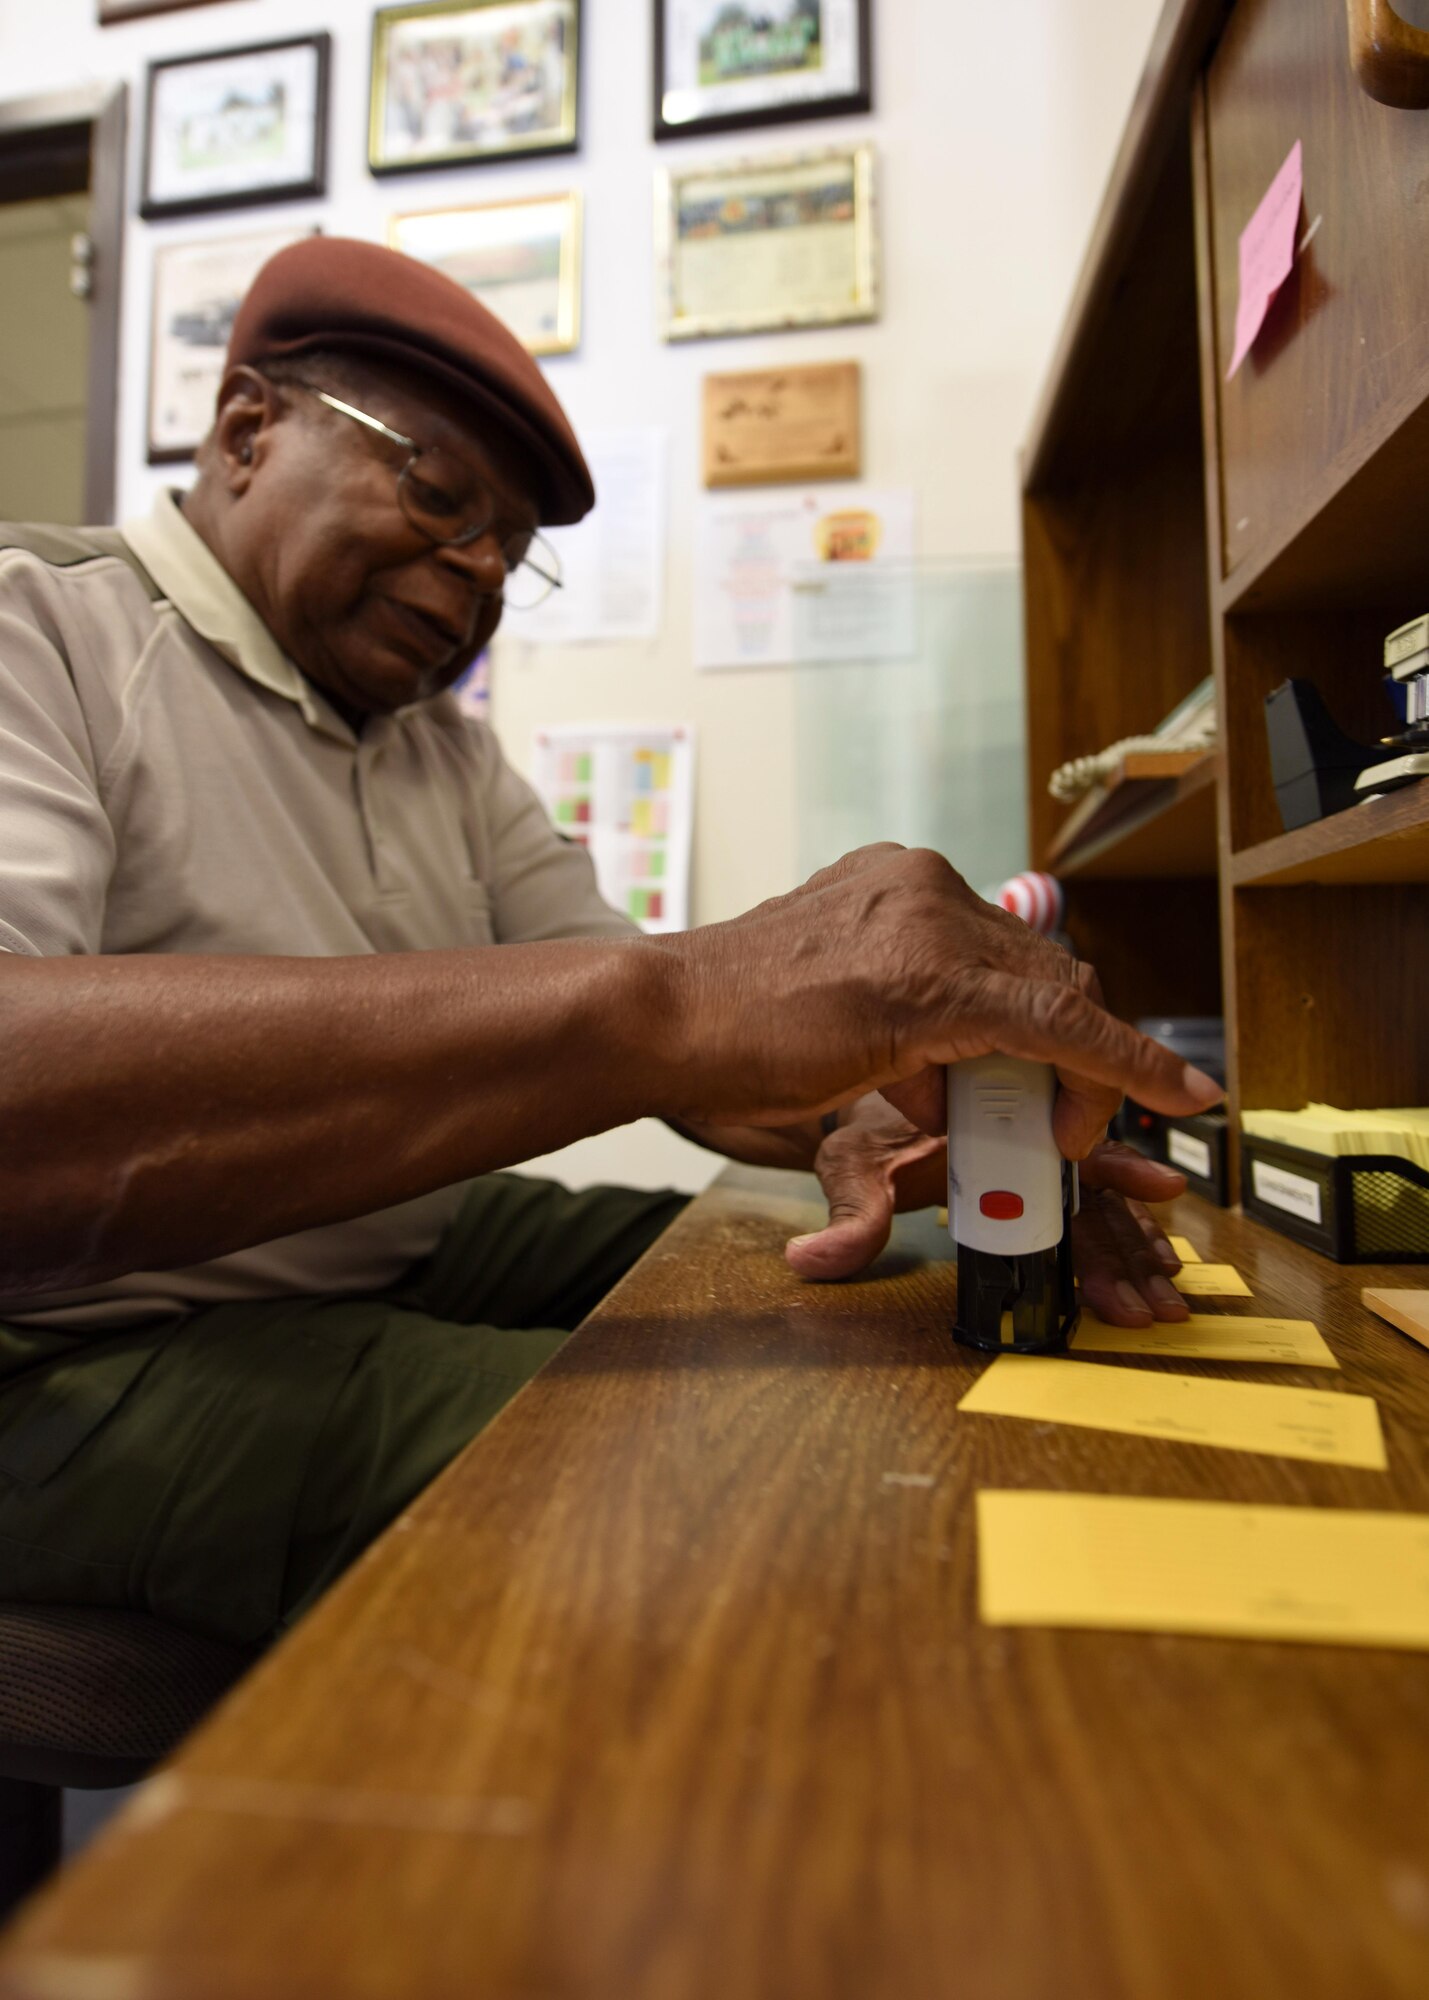 Retired U.S. Air Force Master Sgt. Clarence Rollins, ‘Rocky’, works in the consignments section at the Thrift Shop, Oct. 5, 2017, Vandenberg Air Force Base, Calif. Rocky’s position at the Thrift Shop has become more than another job for him – it’s become his extended family. (U.S. Air Force photo by Senior Airman Kyla Gifford/Released)